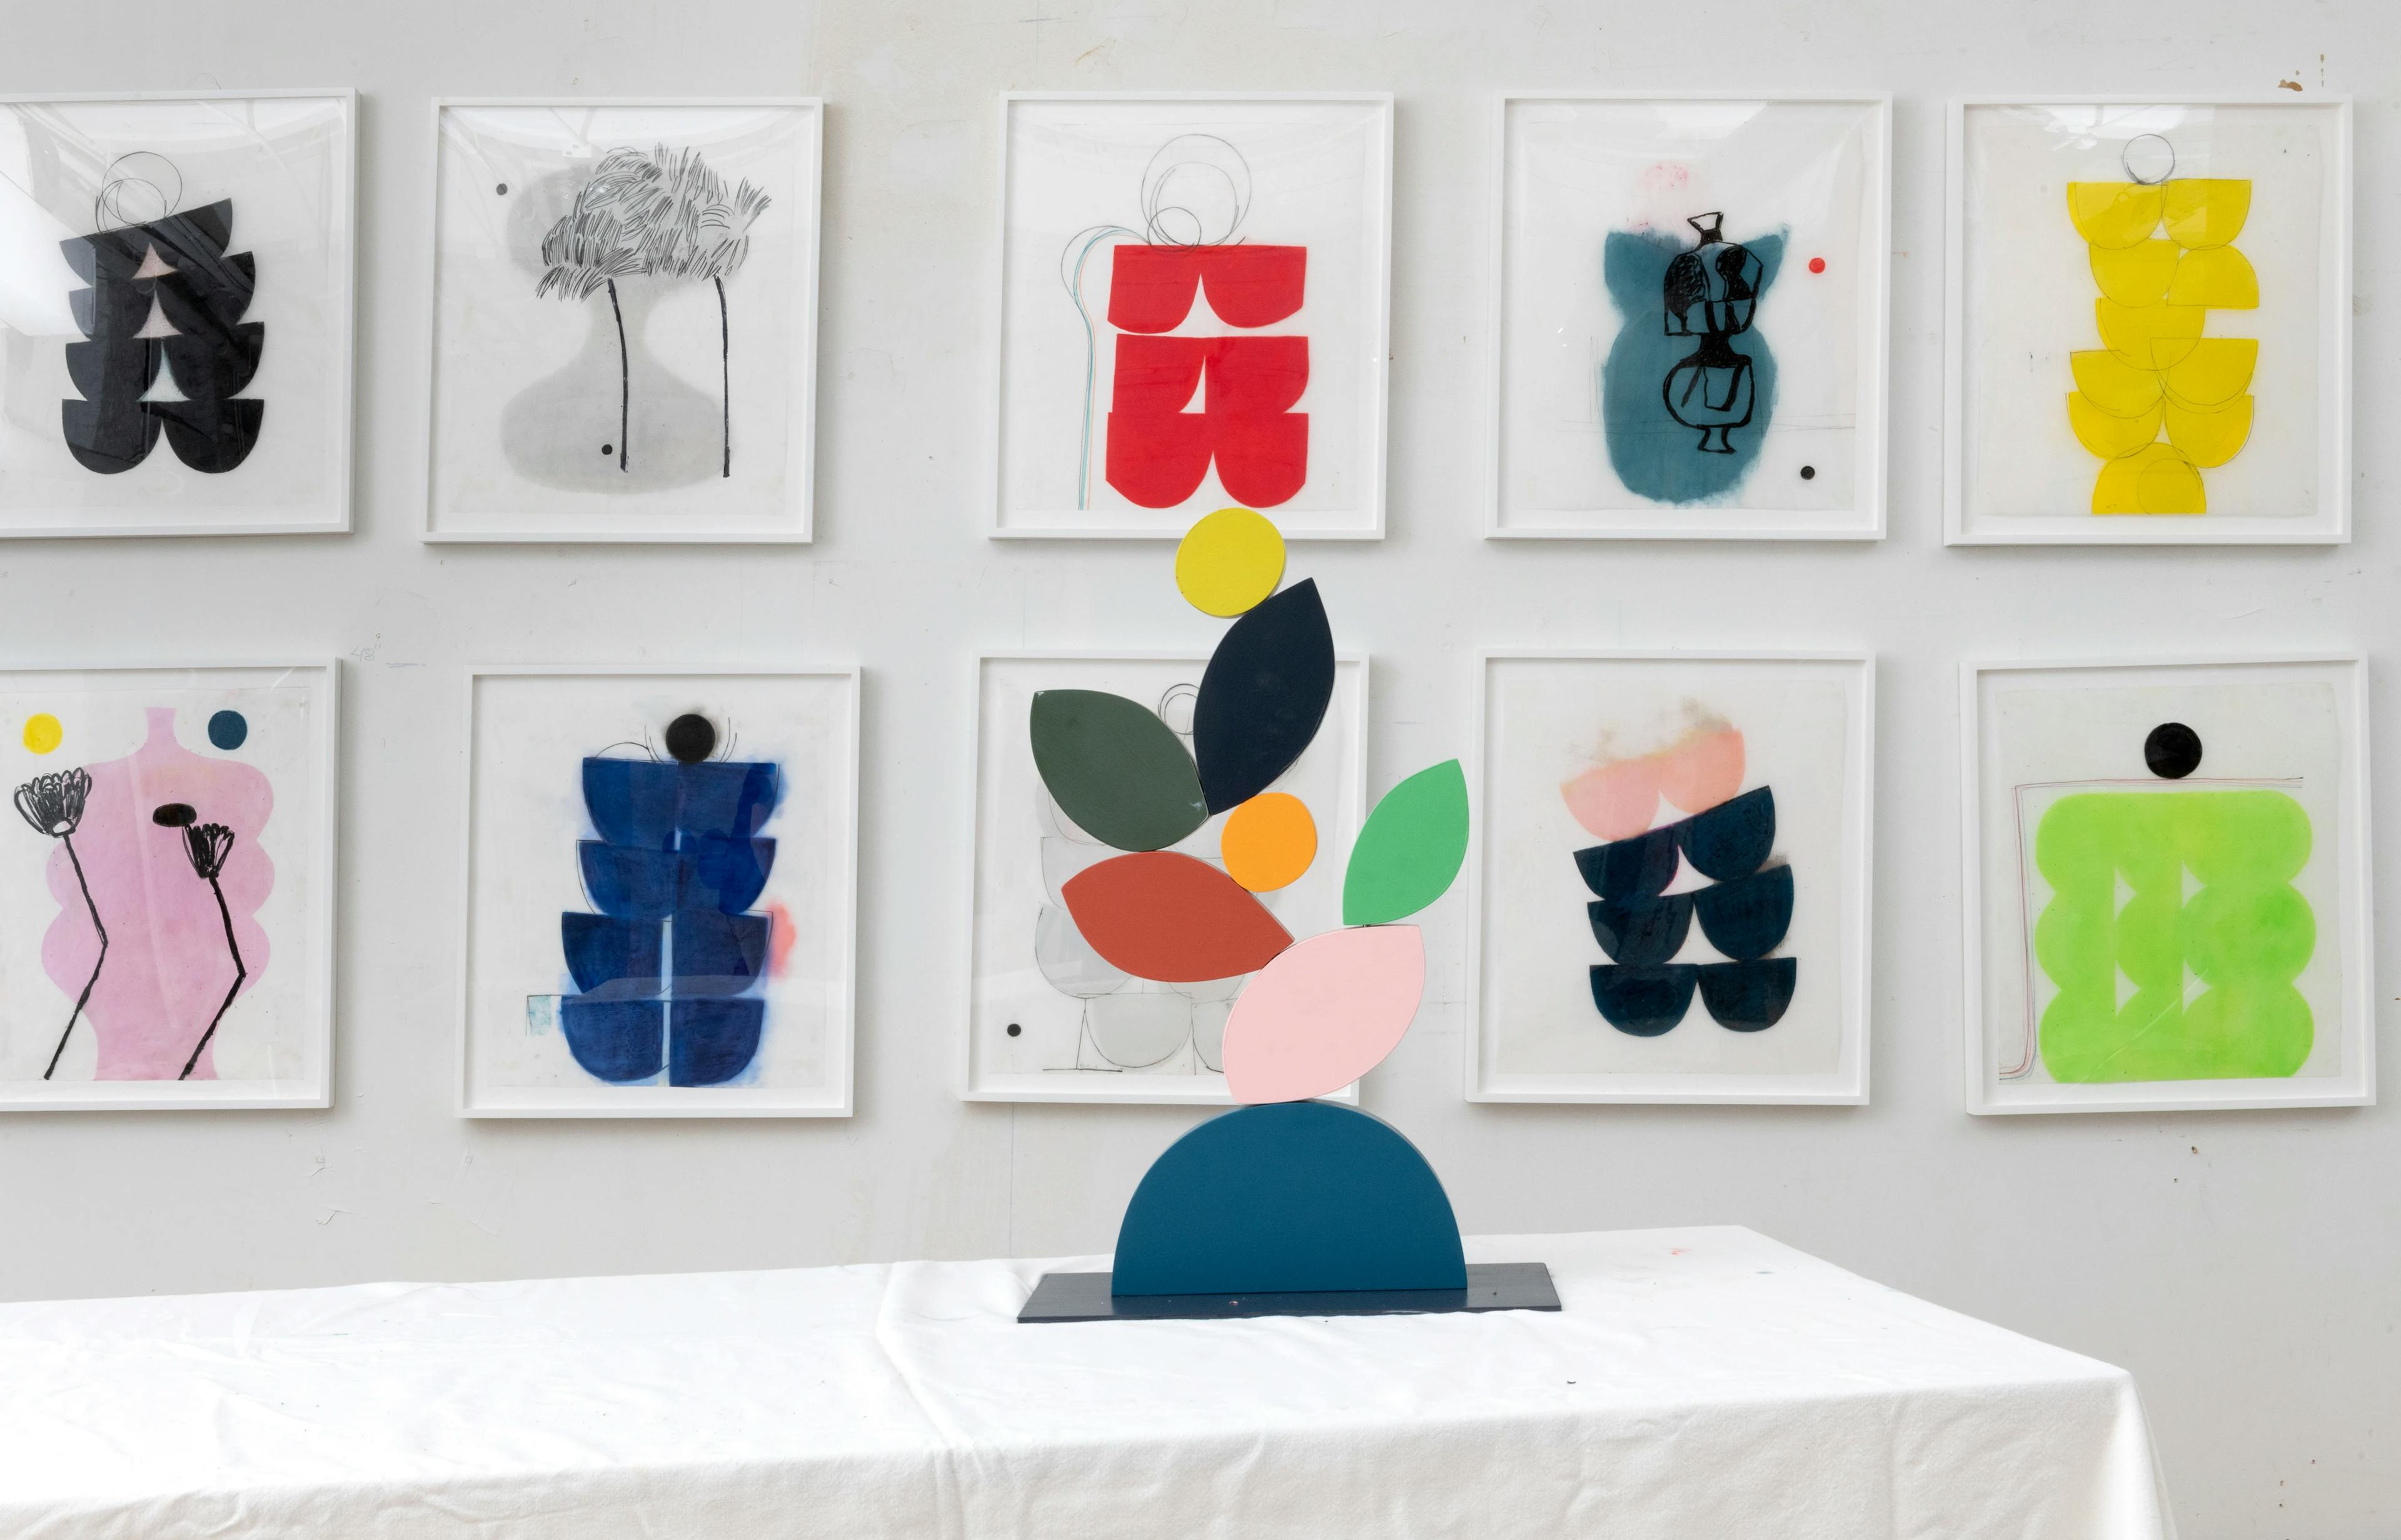 Framed paintings and a colorful, tabletop sculpture by artist Vicki Sher in her studio.